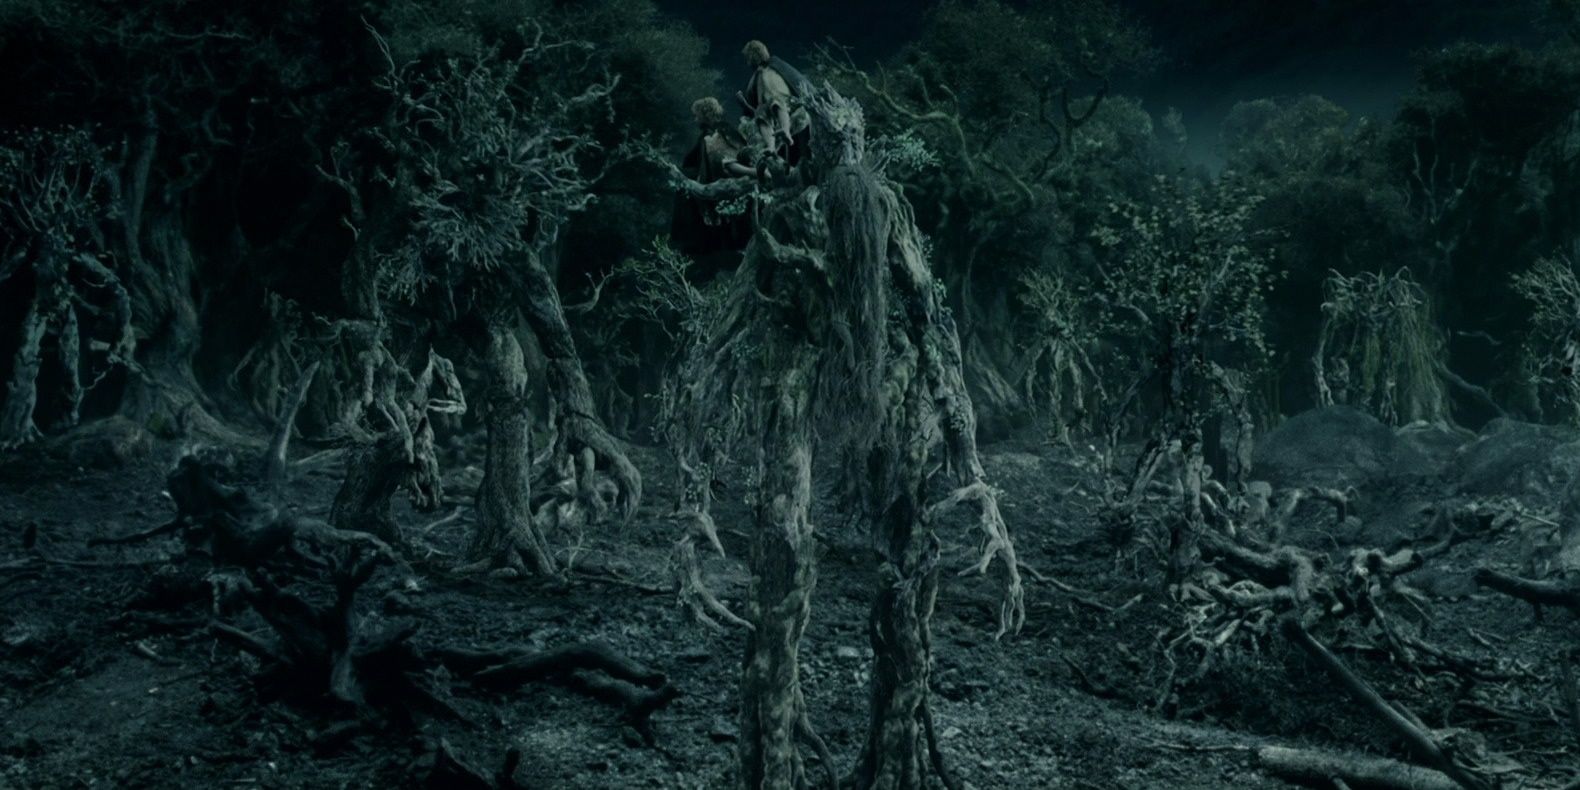 The Ents go to war in The Lord of the Rings